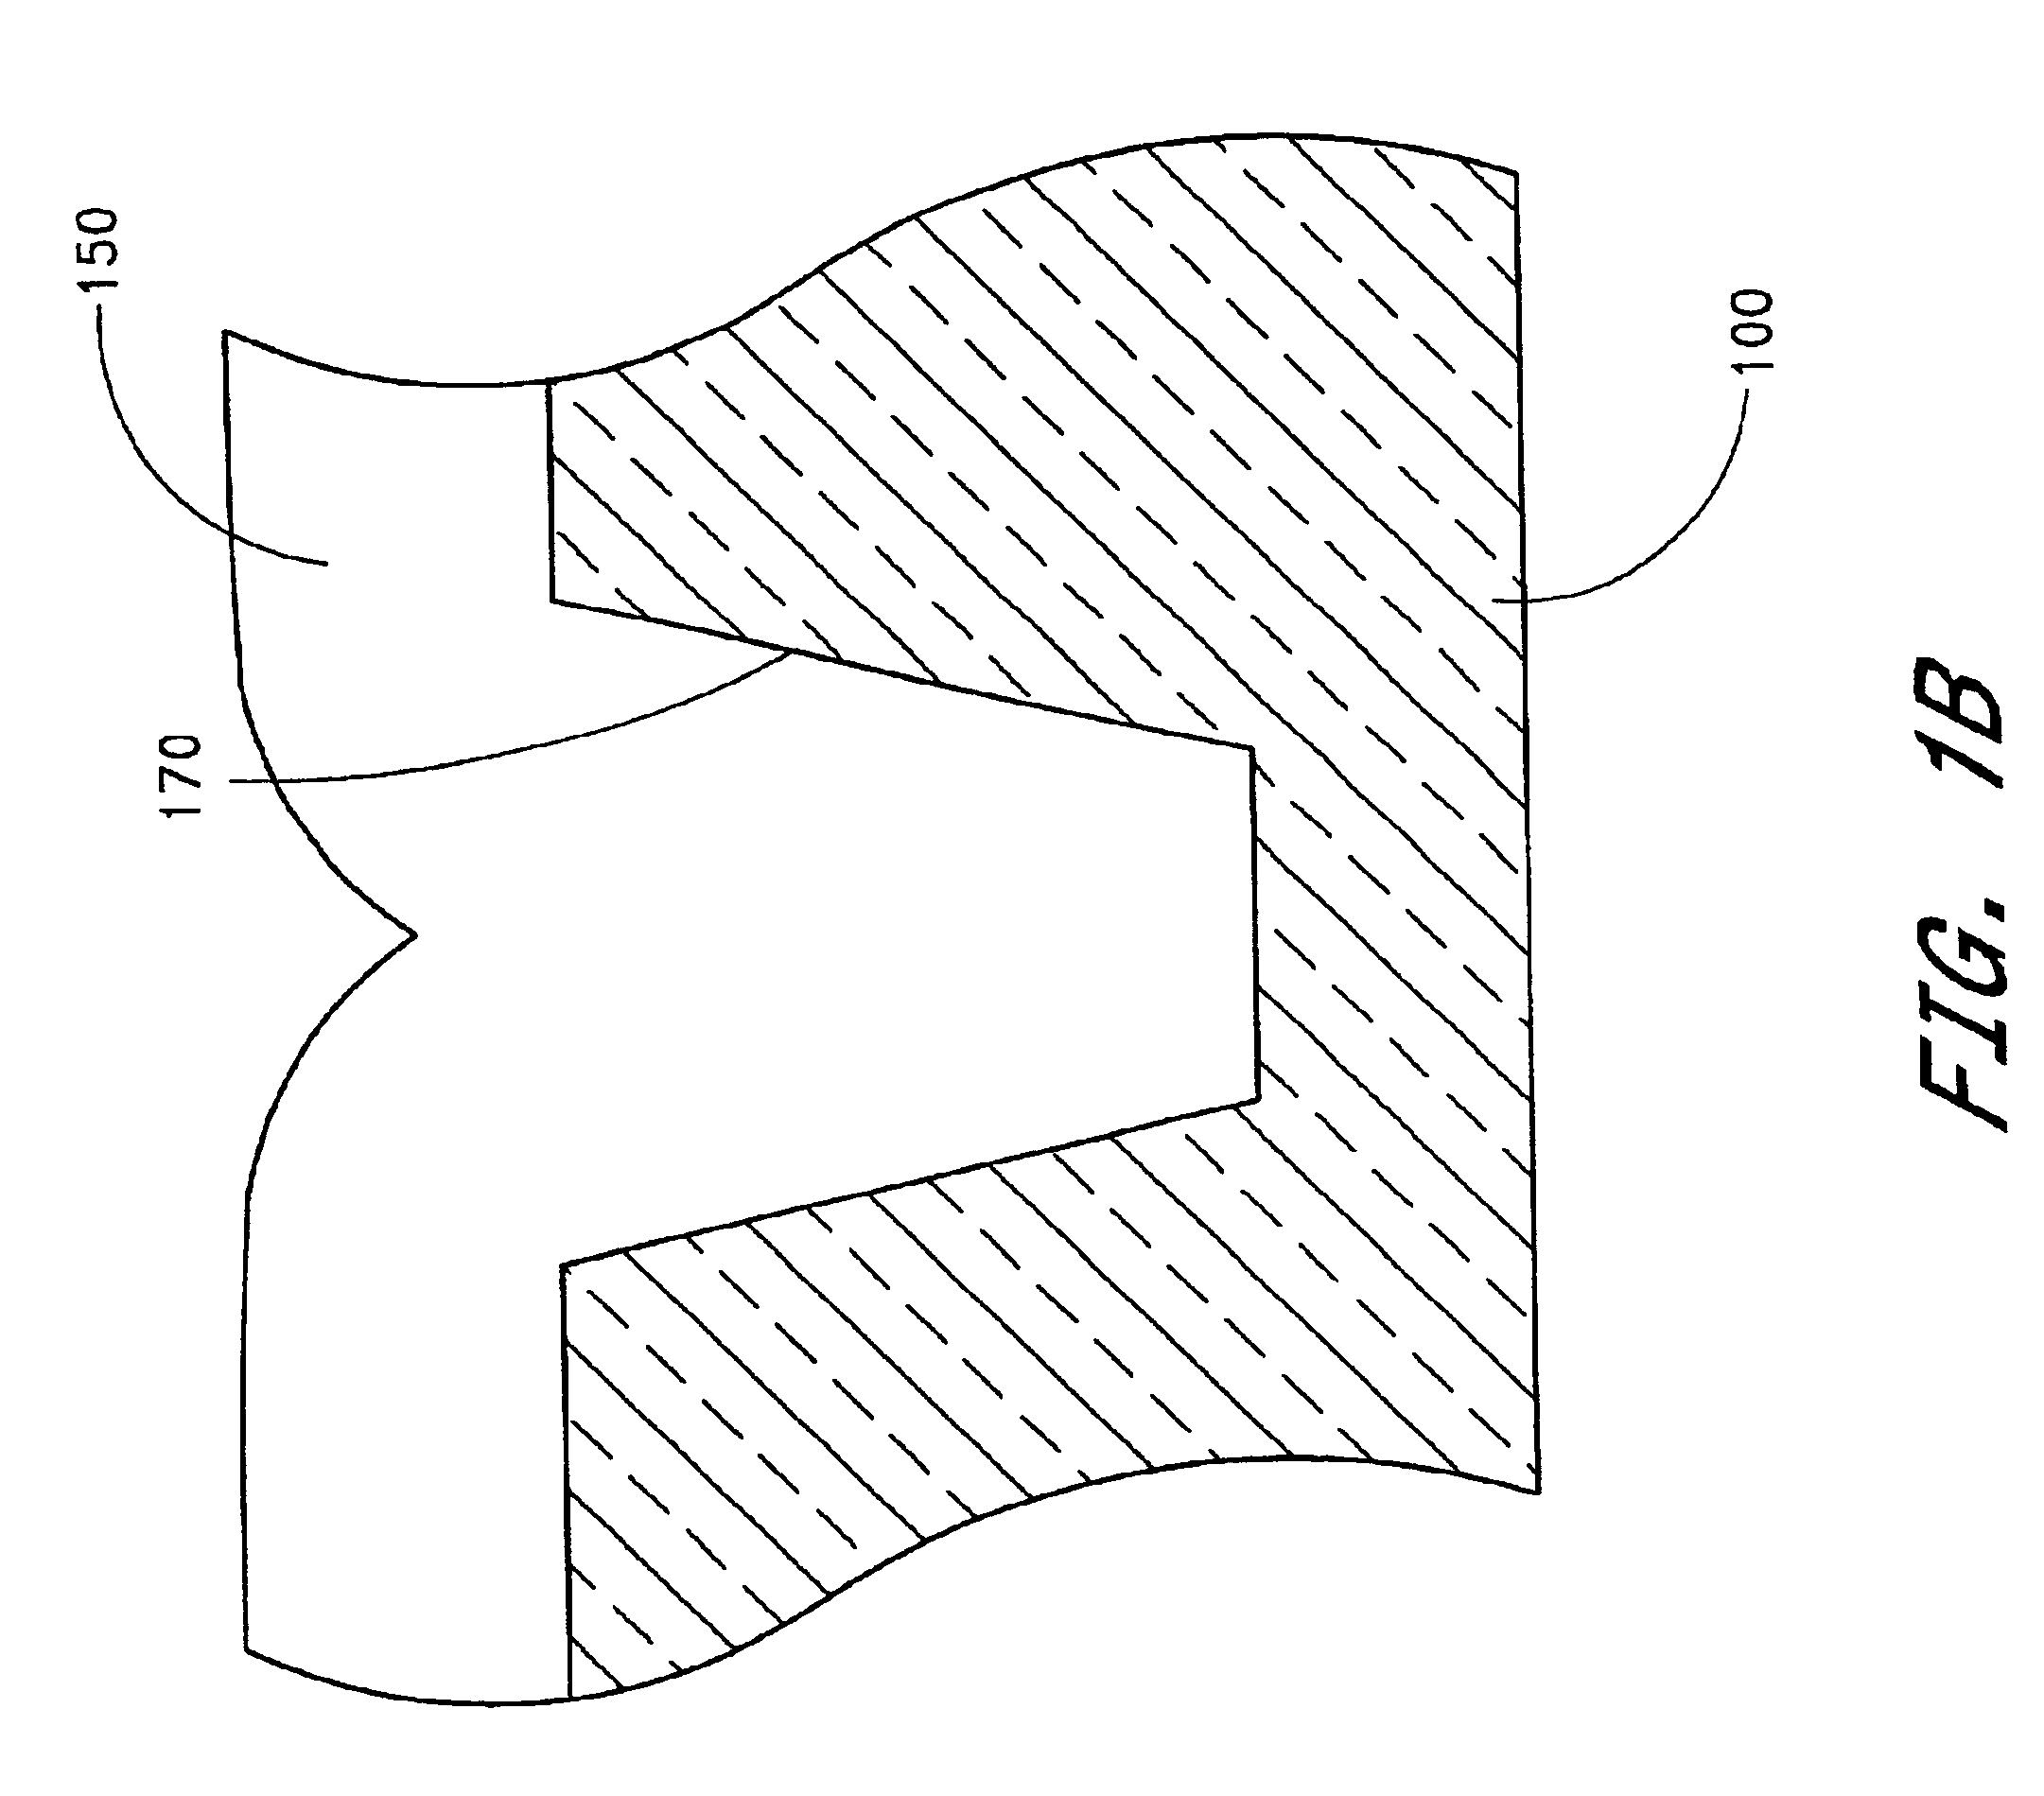 Method of fabricating trench isolation structures for integrated circuits using atomic layer deposition